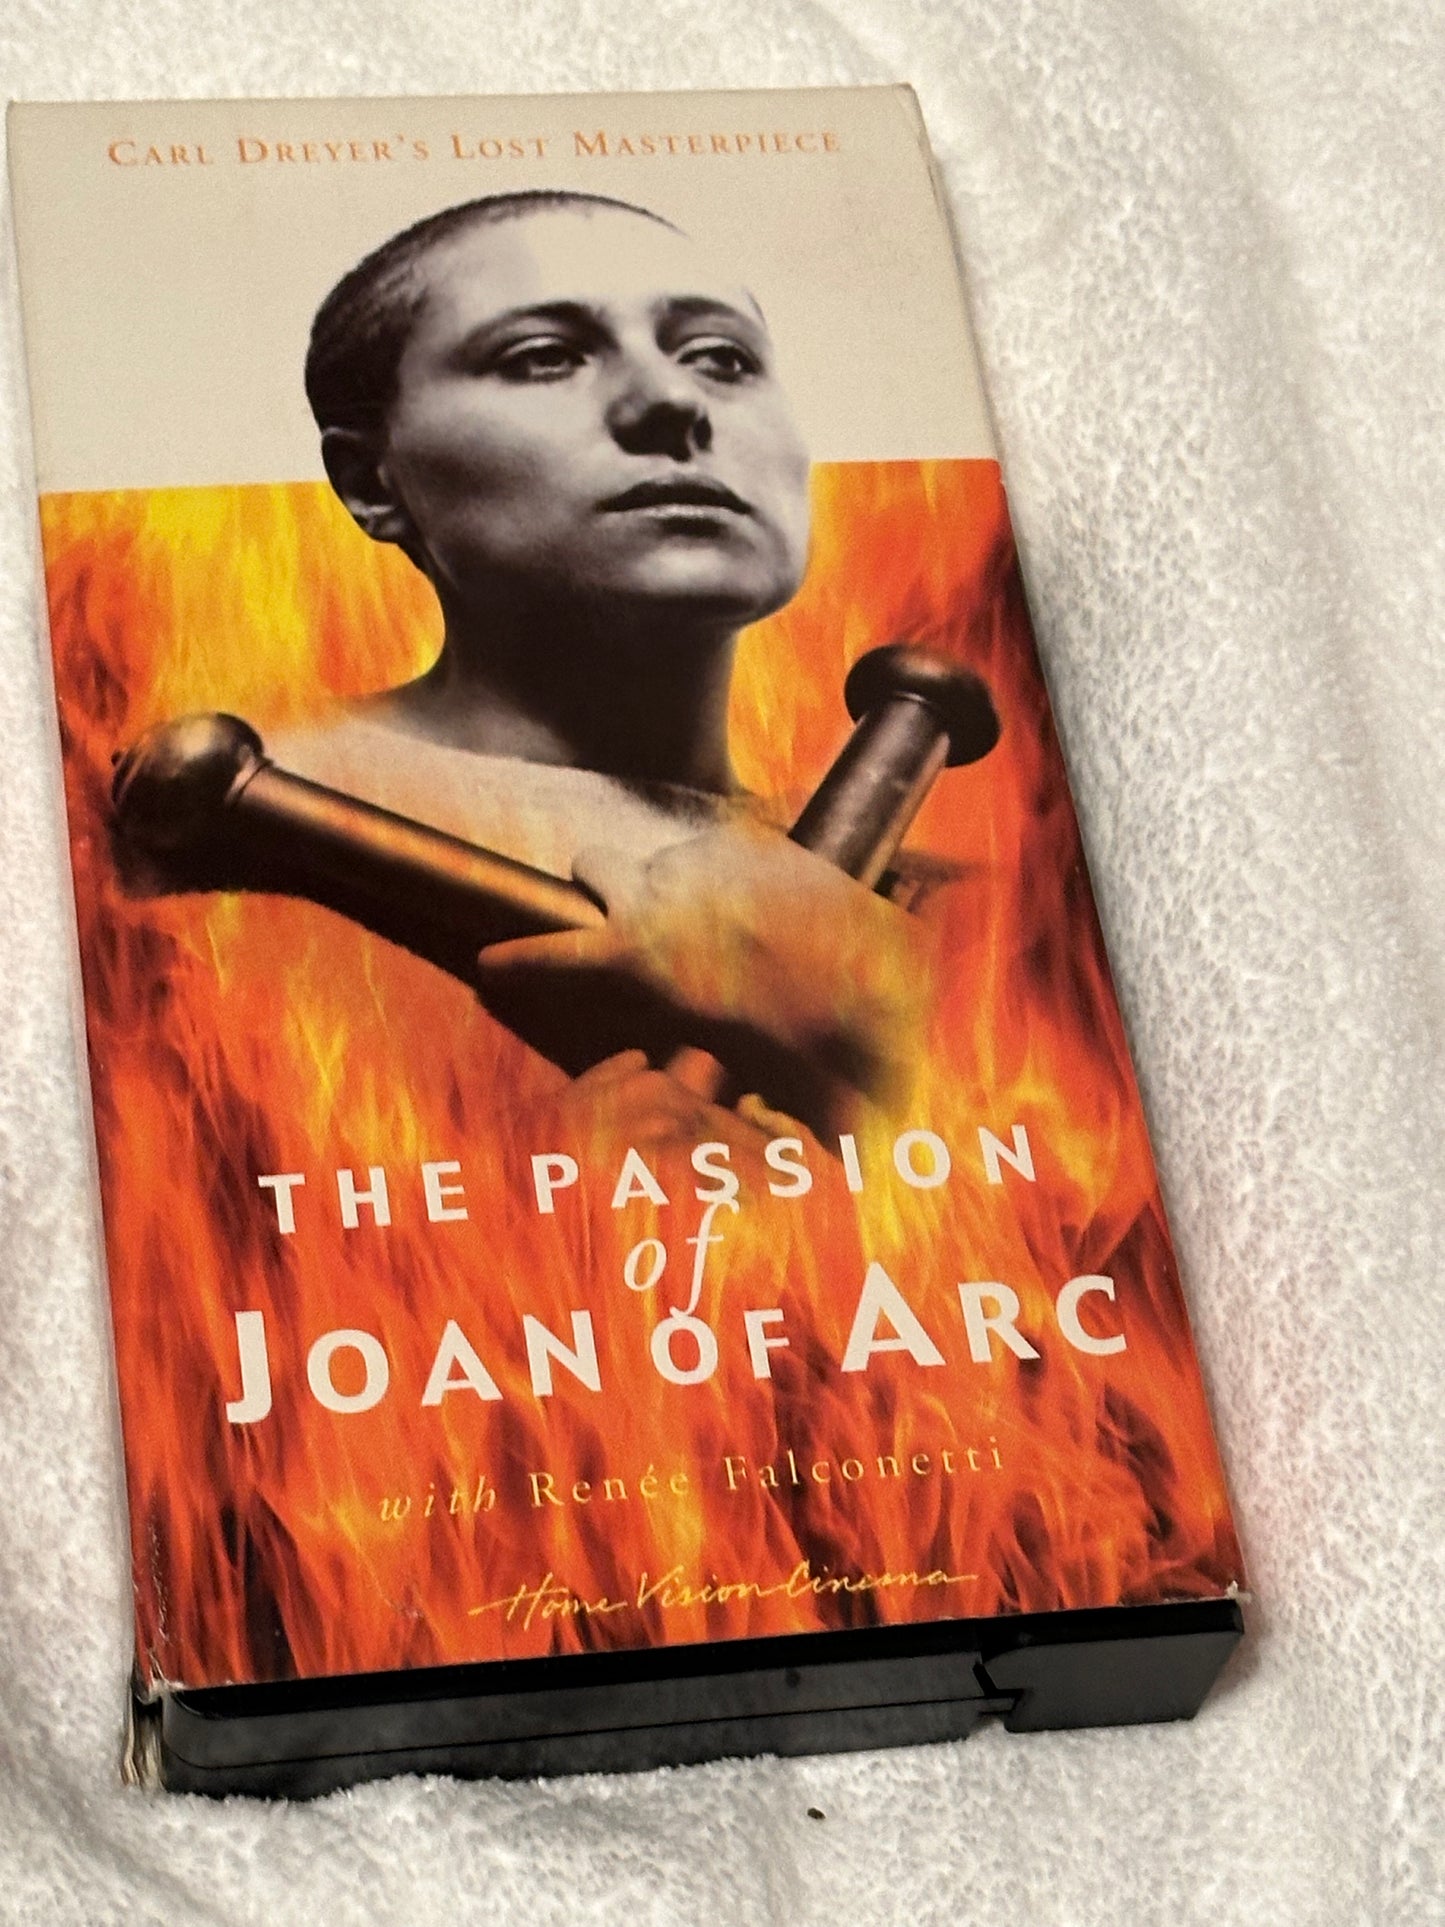 The Passion of Joan of Arc VHS: A Captivating Classic Film Experience